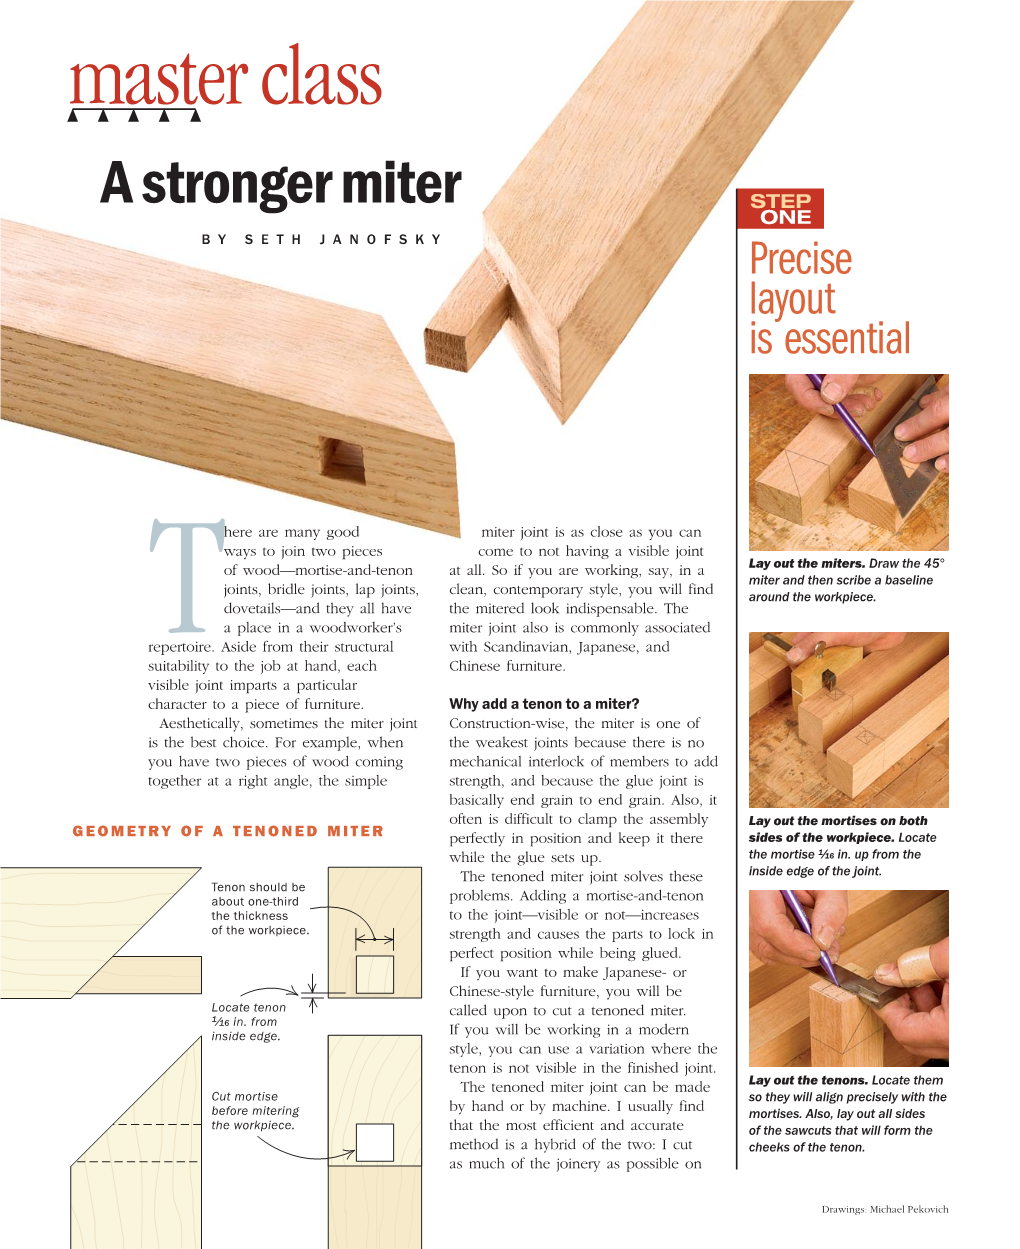 A Stronger Miter STEP ONE by SETH JANOFSKY Precise Layout Is Essential